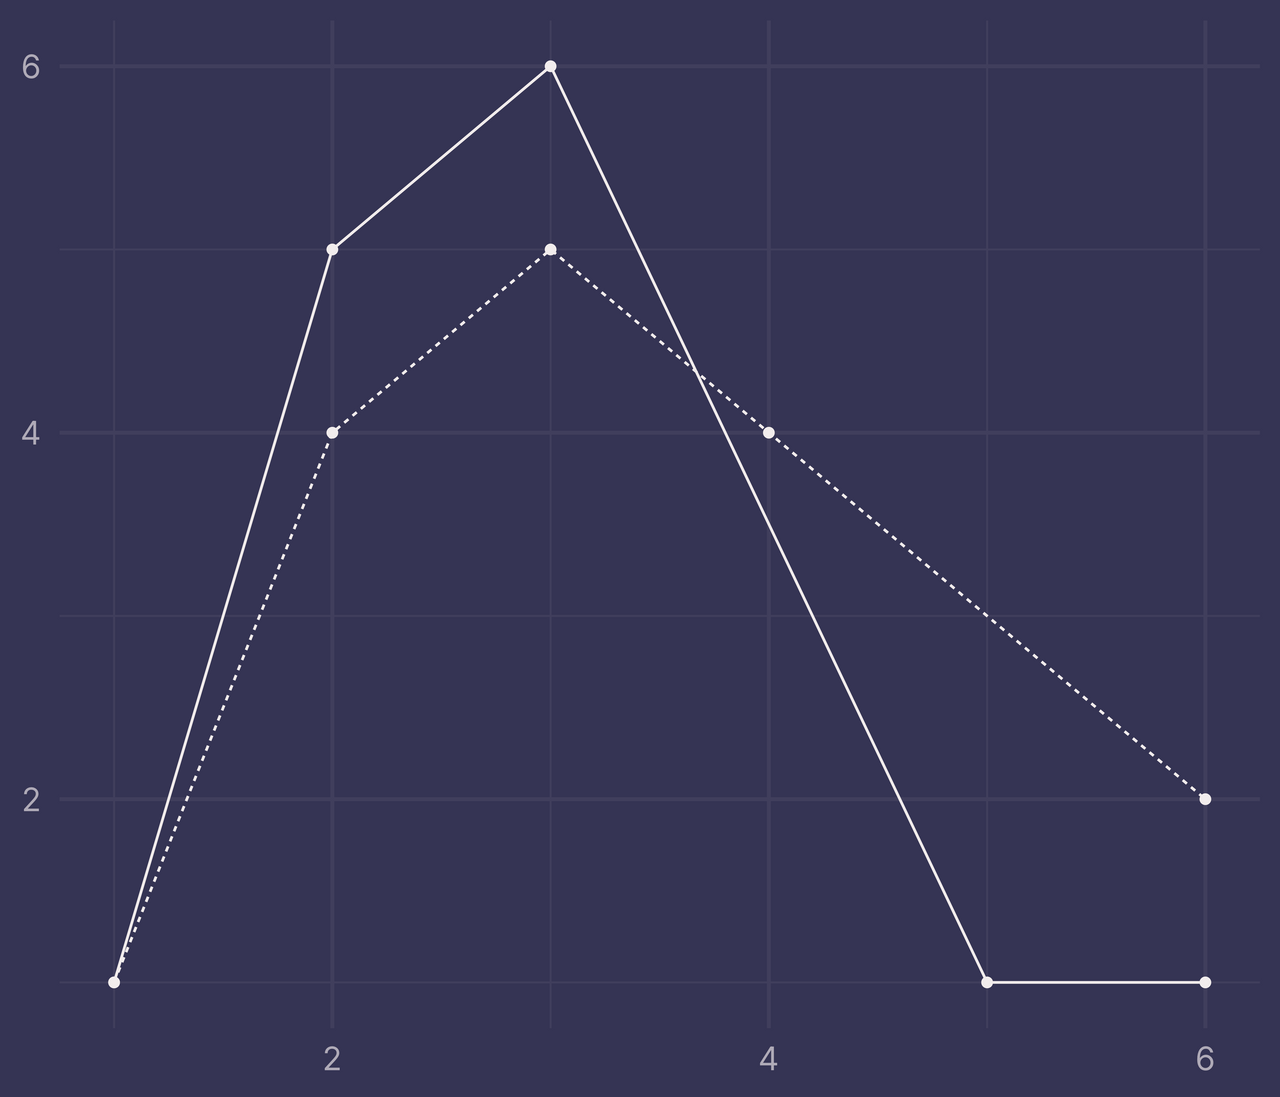 Plot of two lines with intersections where some points are missing